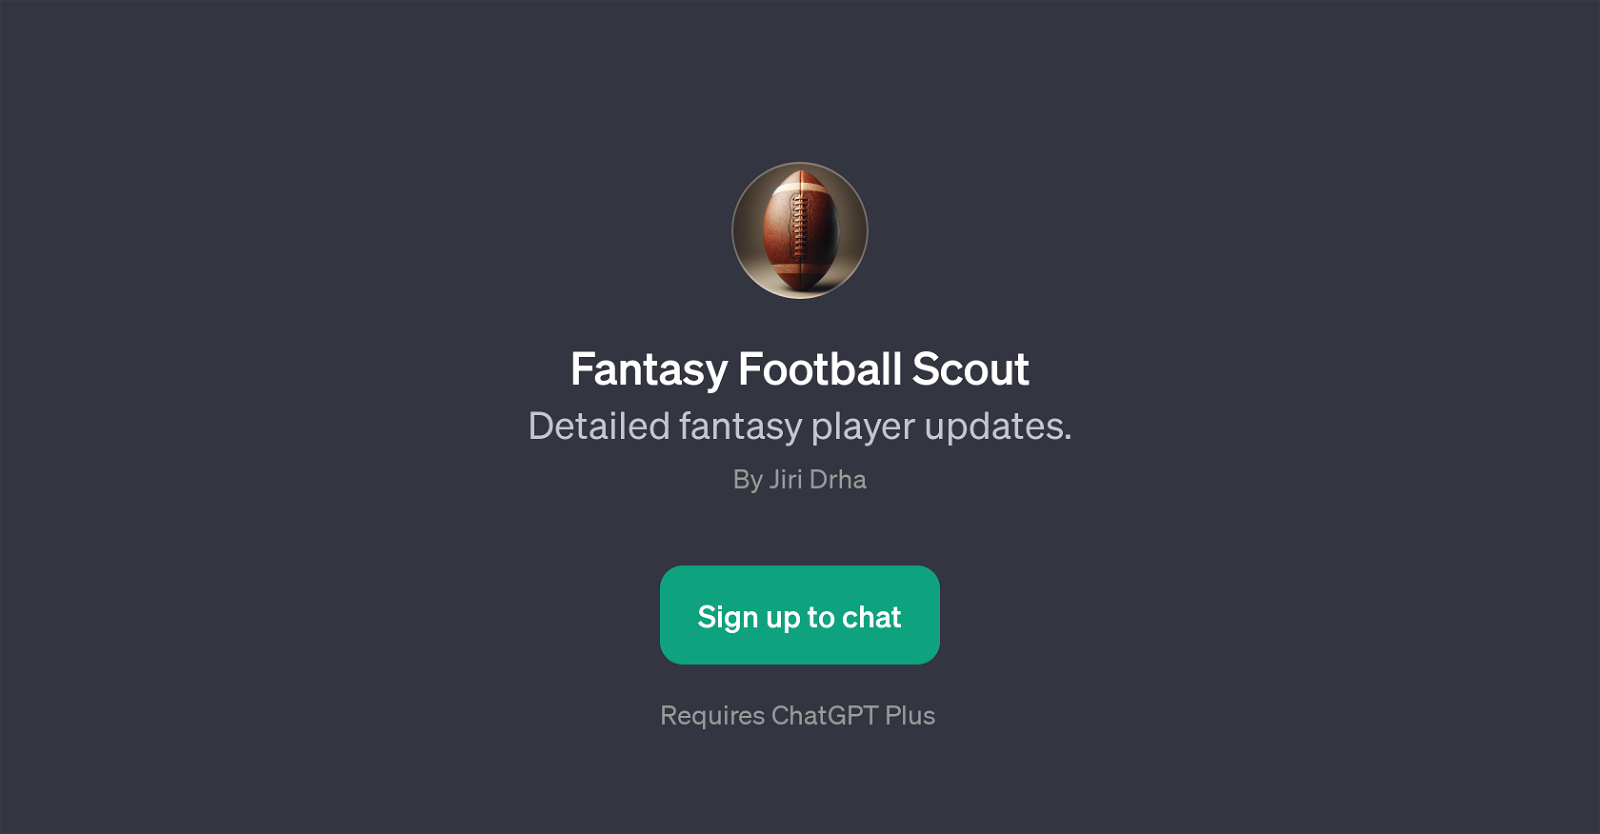 Fantasy Football Scout website